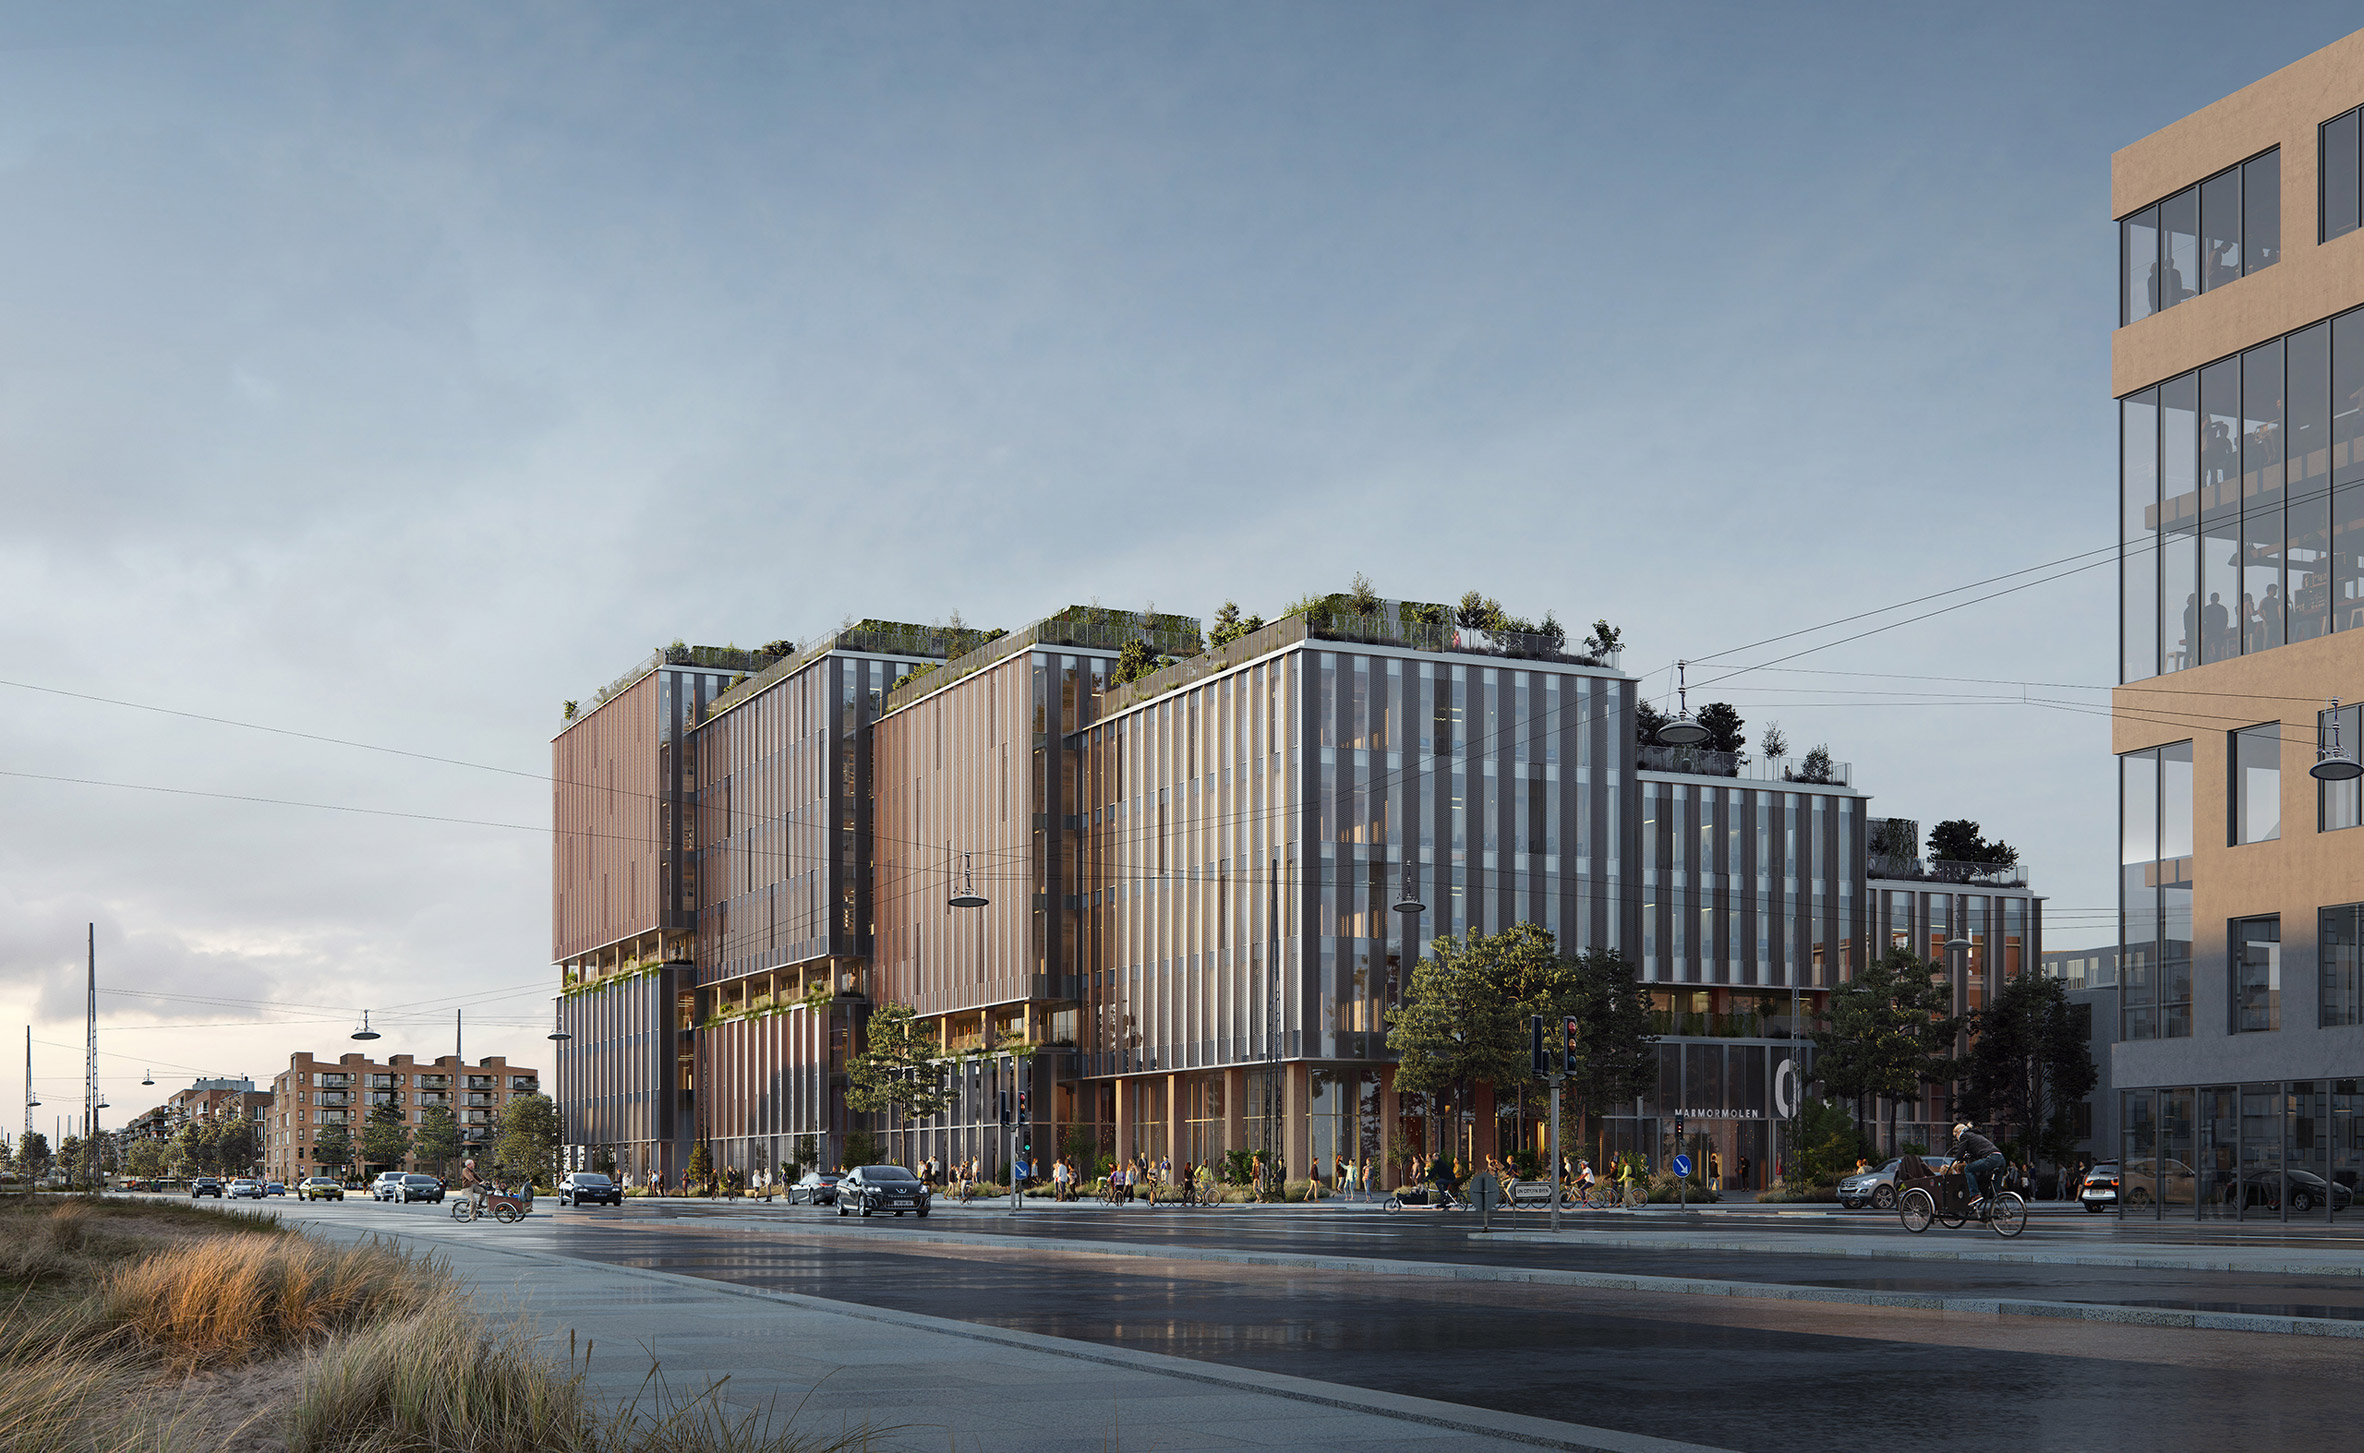 Henning Larsen Reveals Plans For One Of The Largest Contemporary Wood Structures In Denmark